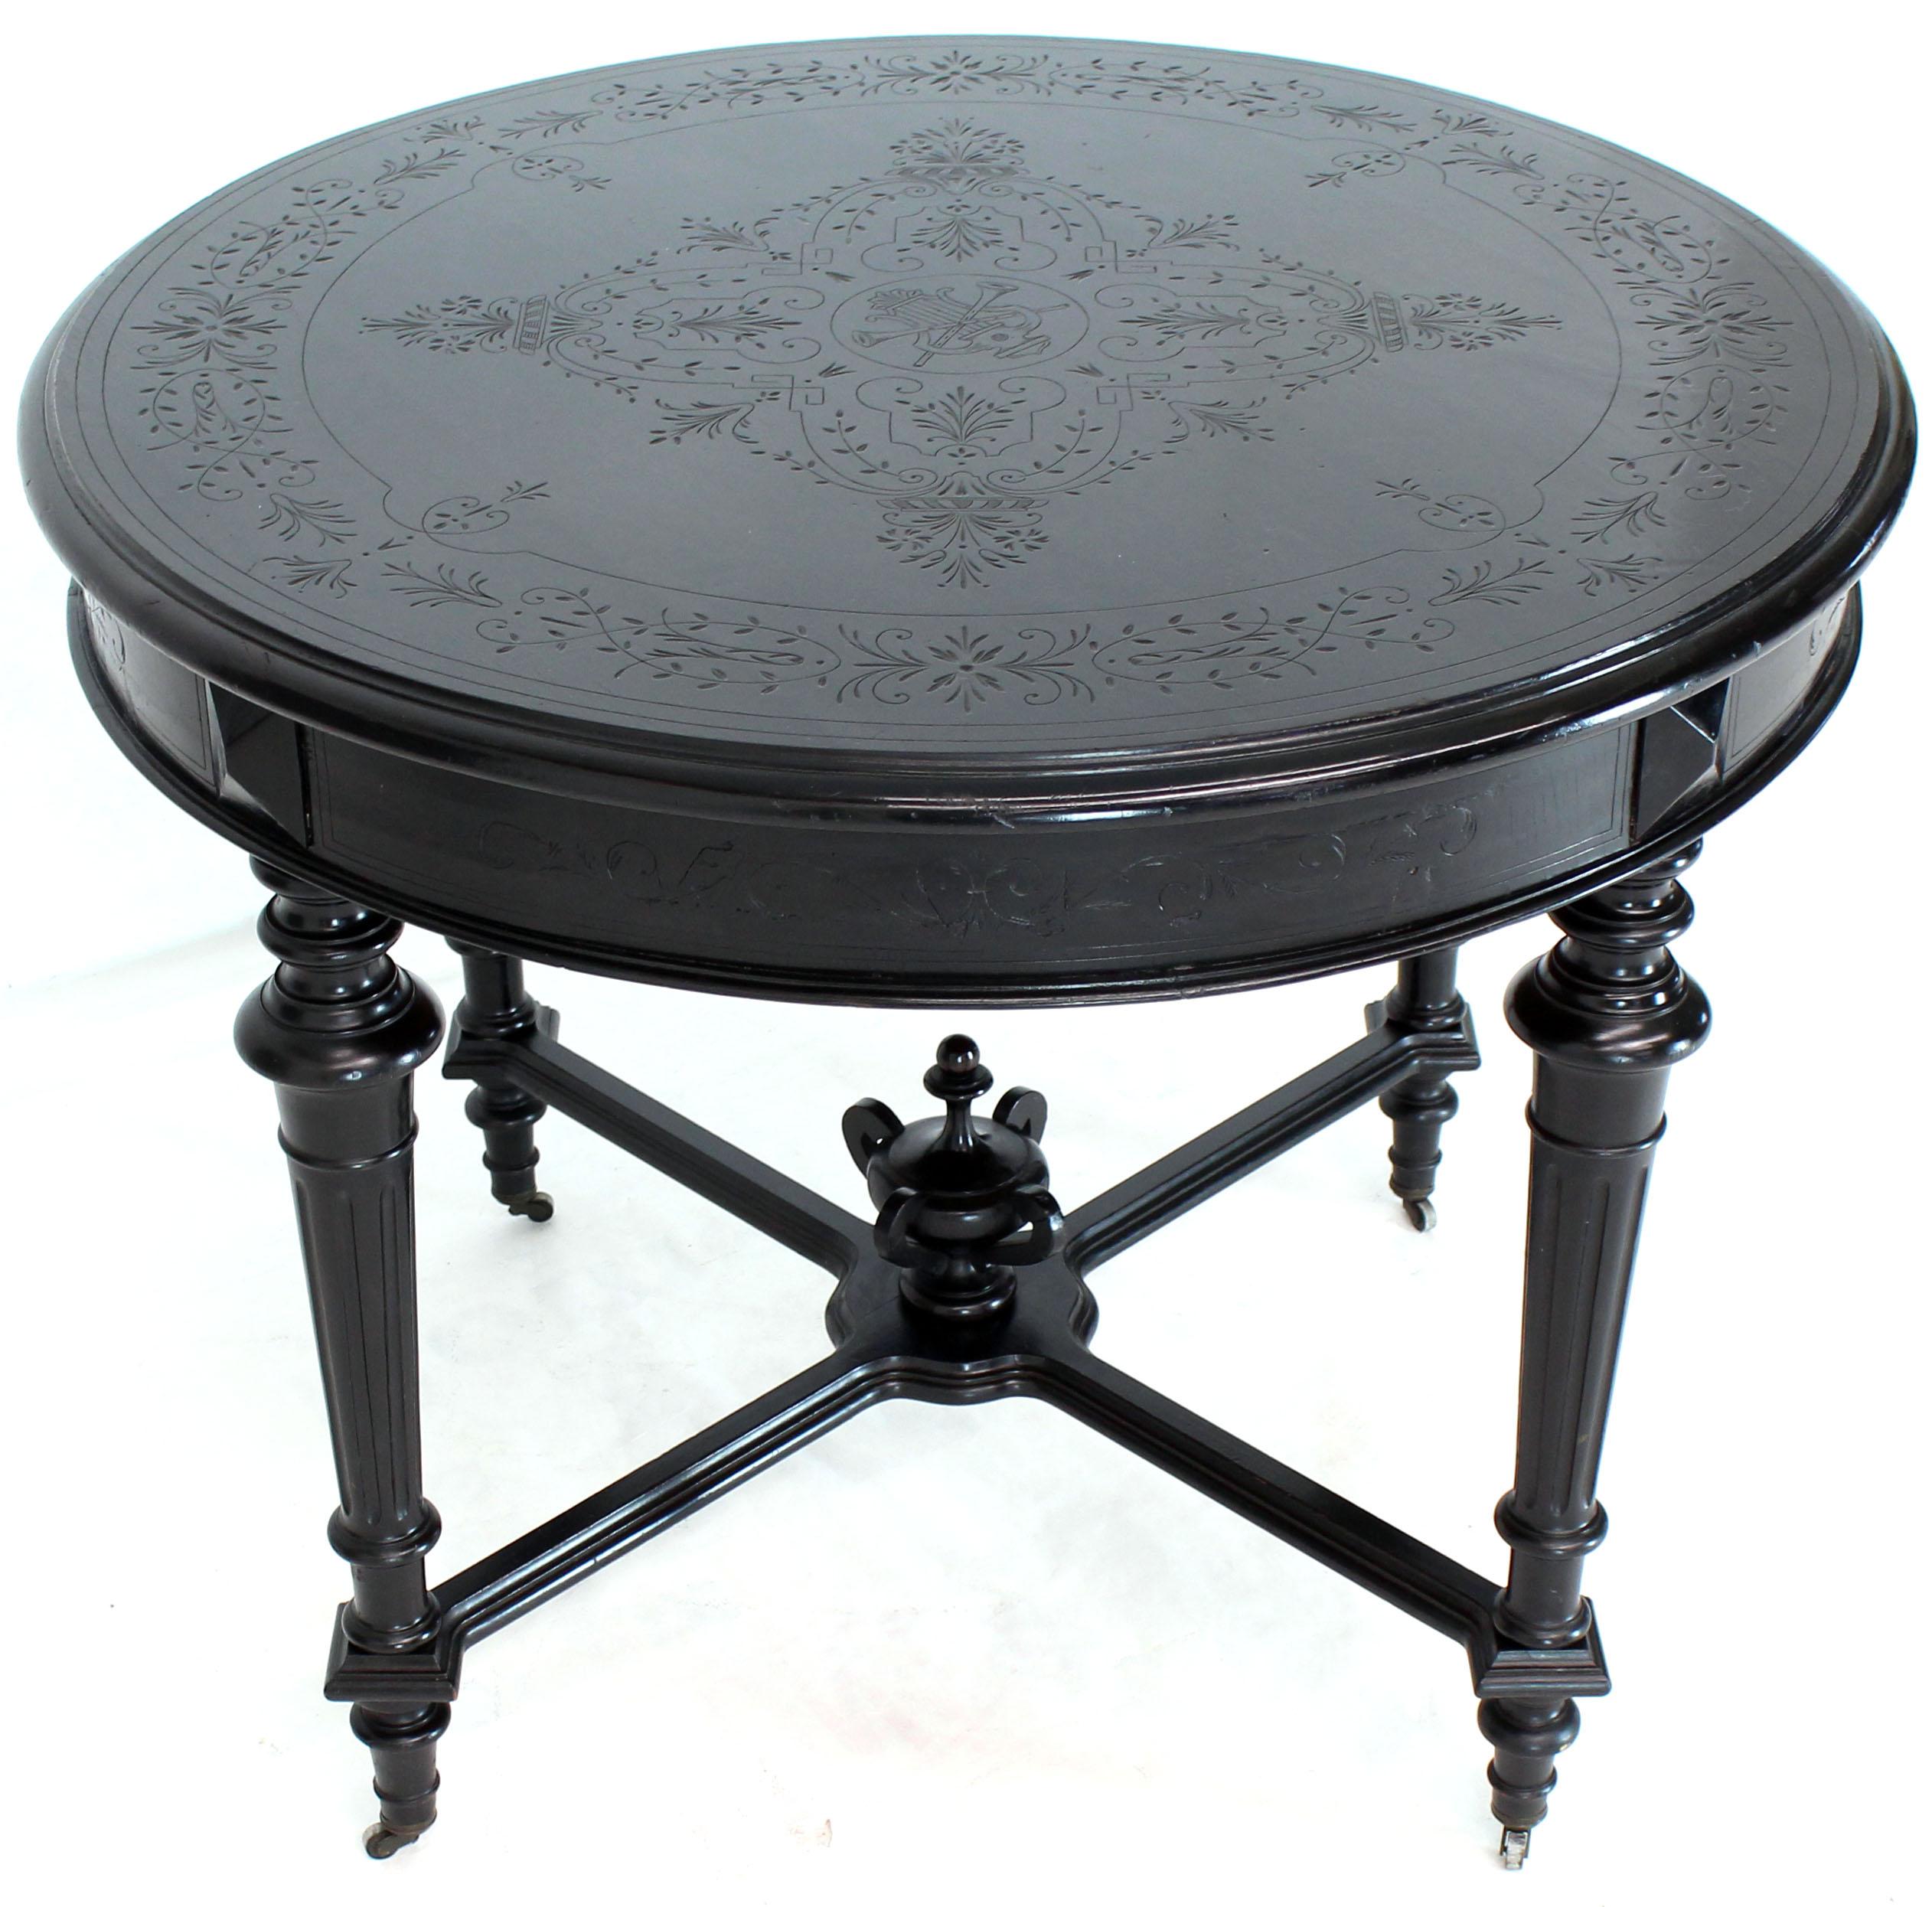 Blackened Antique Ebonised Round Centre Game Card Table Victorian East Lake 1880s